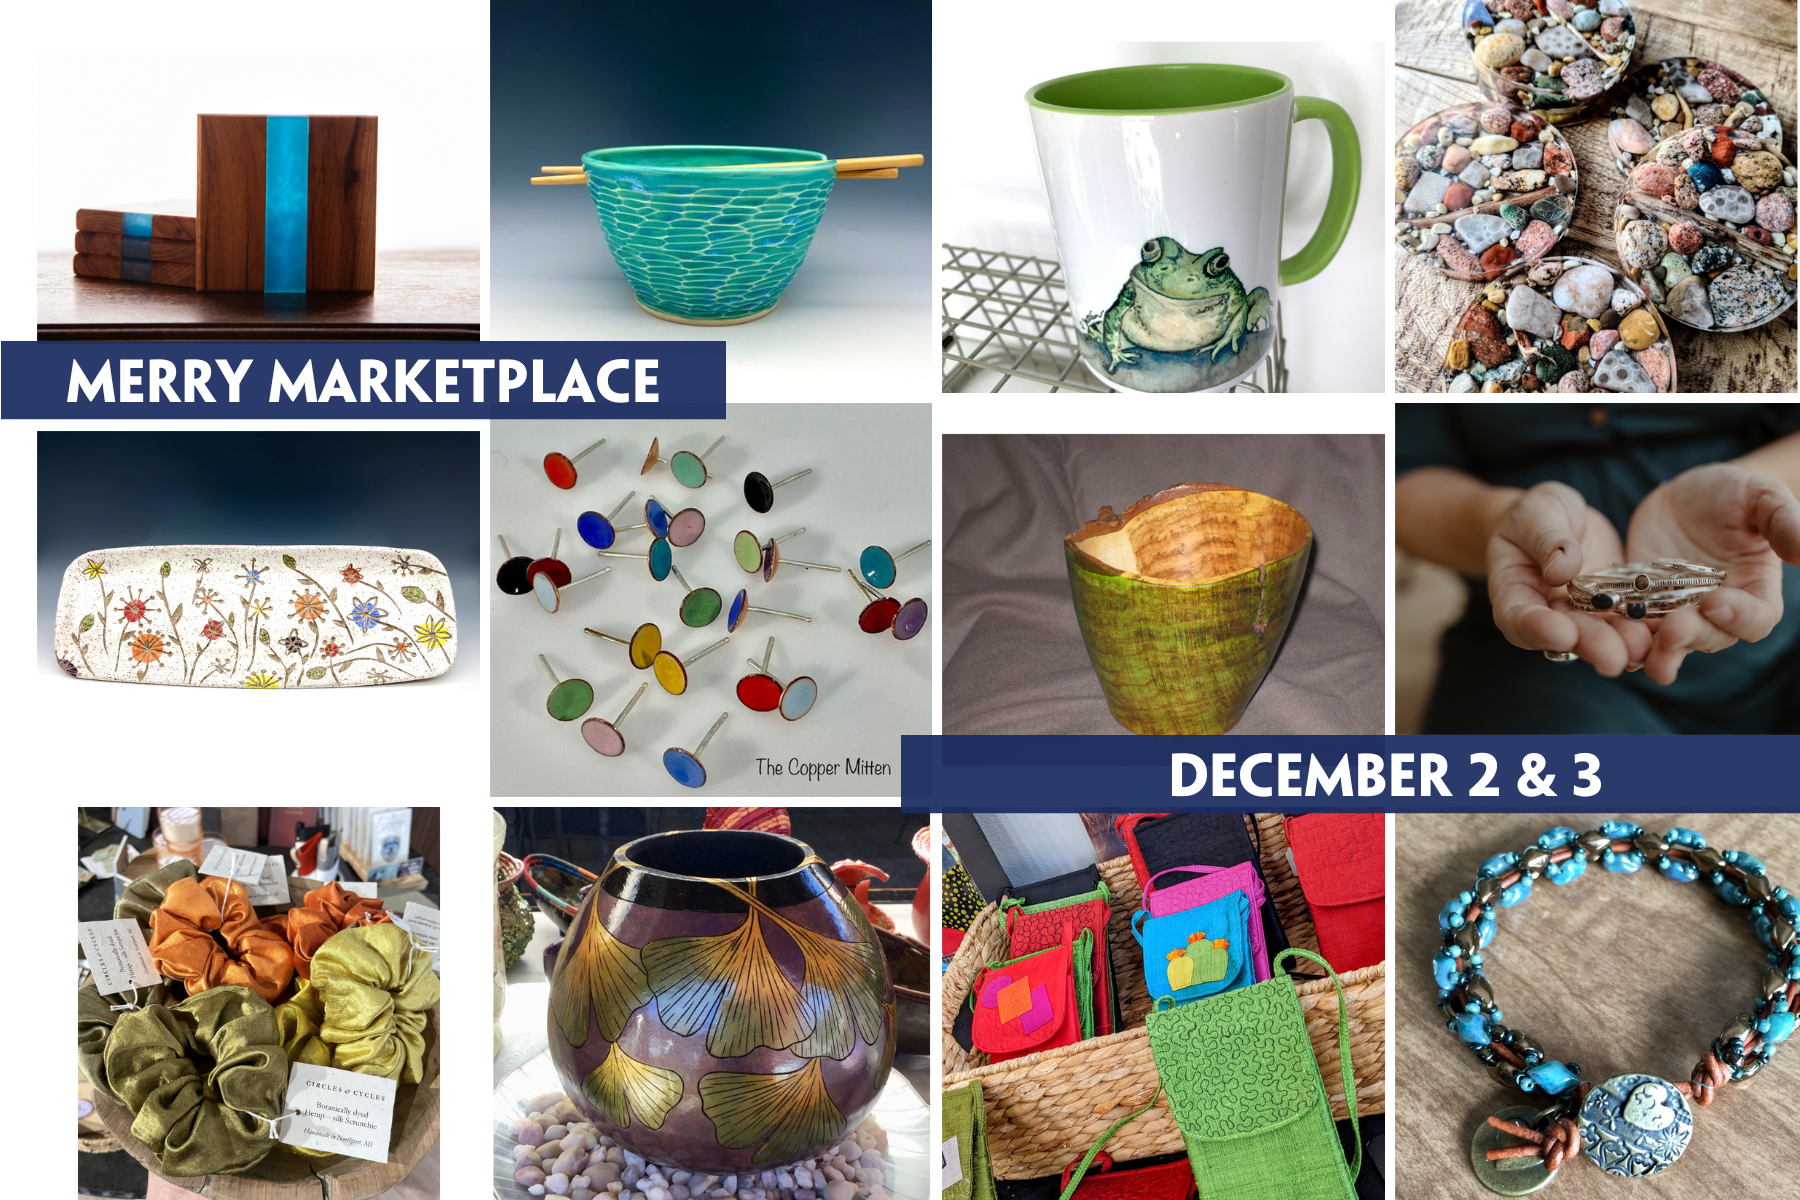 Images of art you will see at the December Merry Marketplace